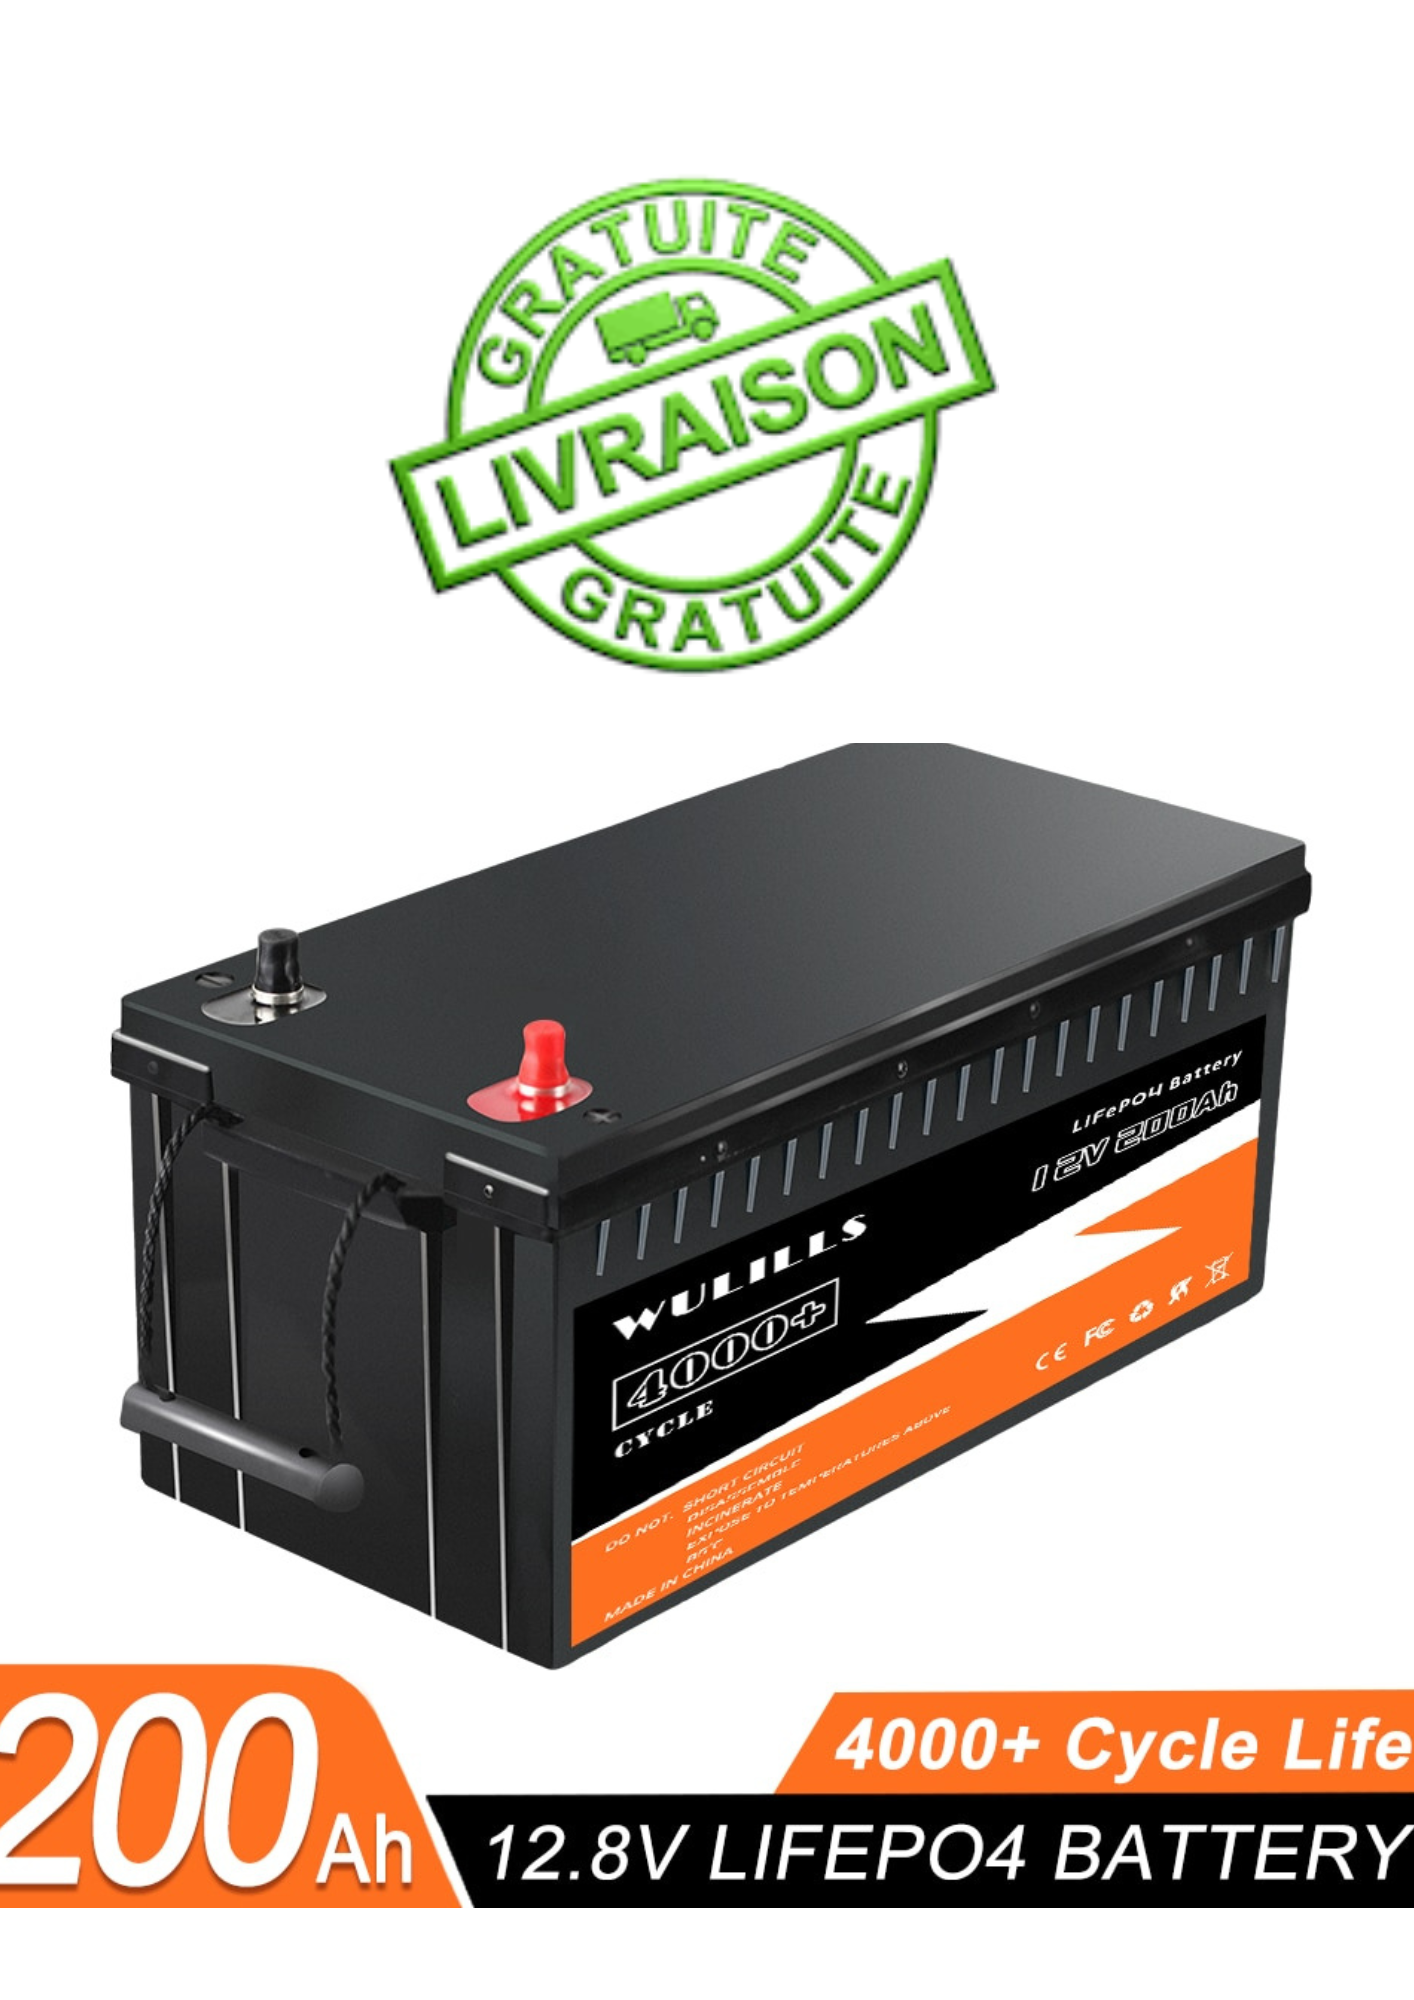 12V 200Ah LiFePO4 Battery with Built-in BMS for Solar Power System and Motorhome (RV)